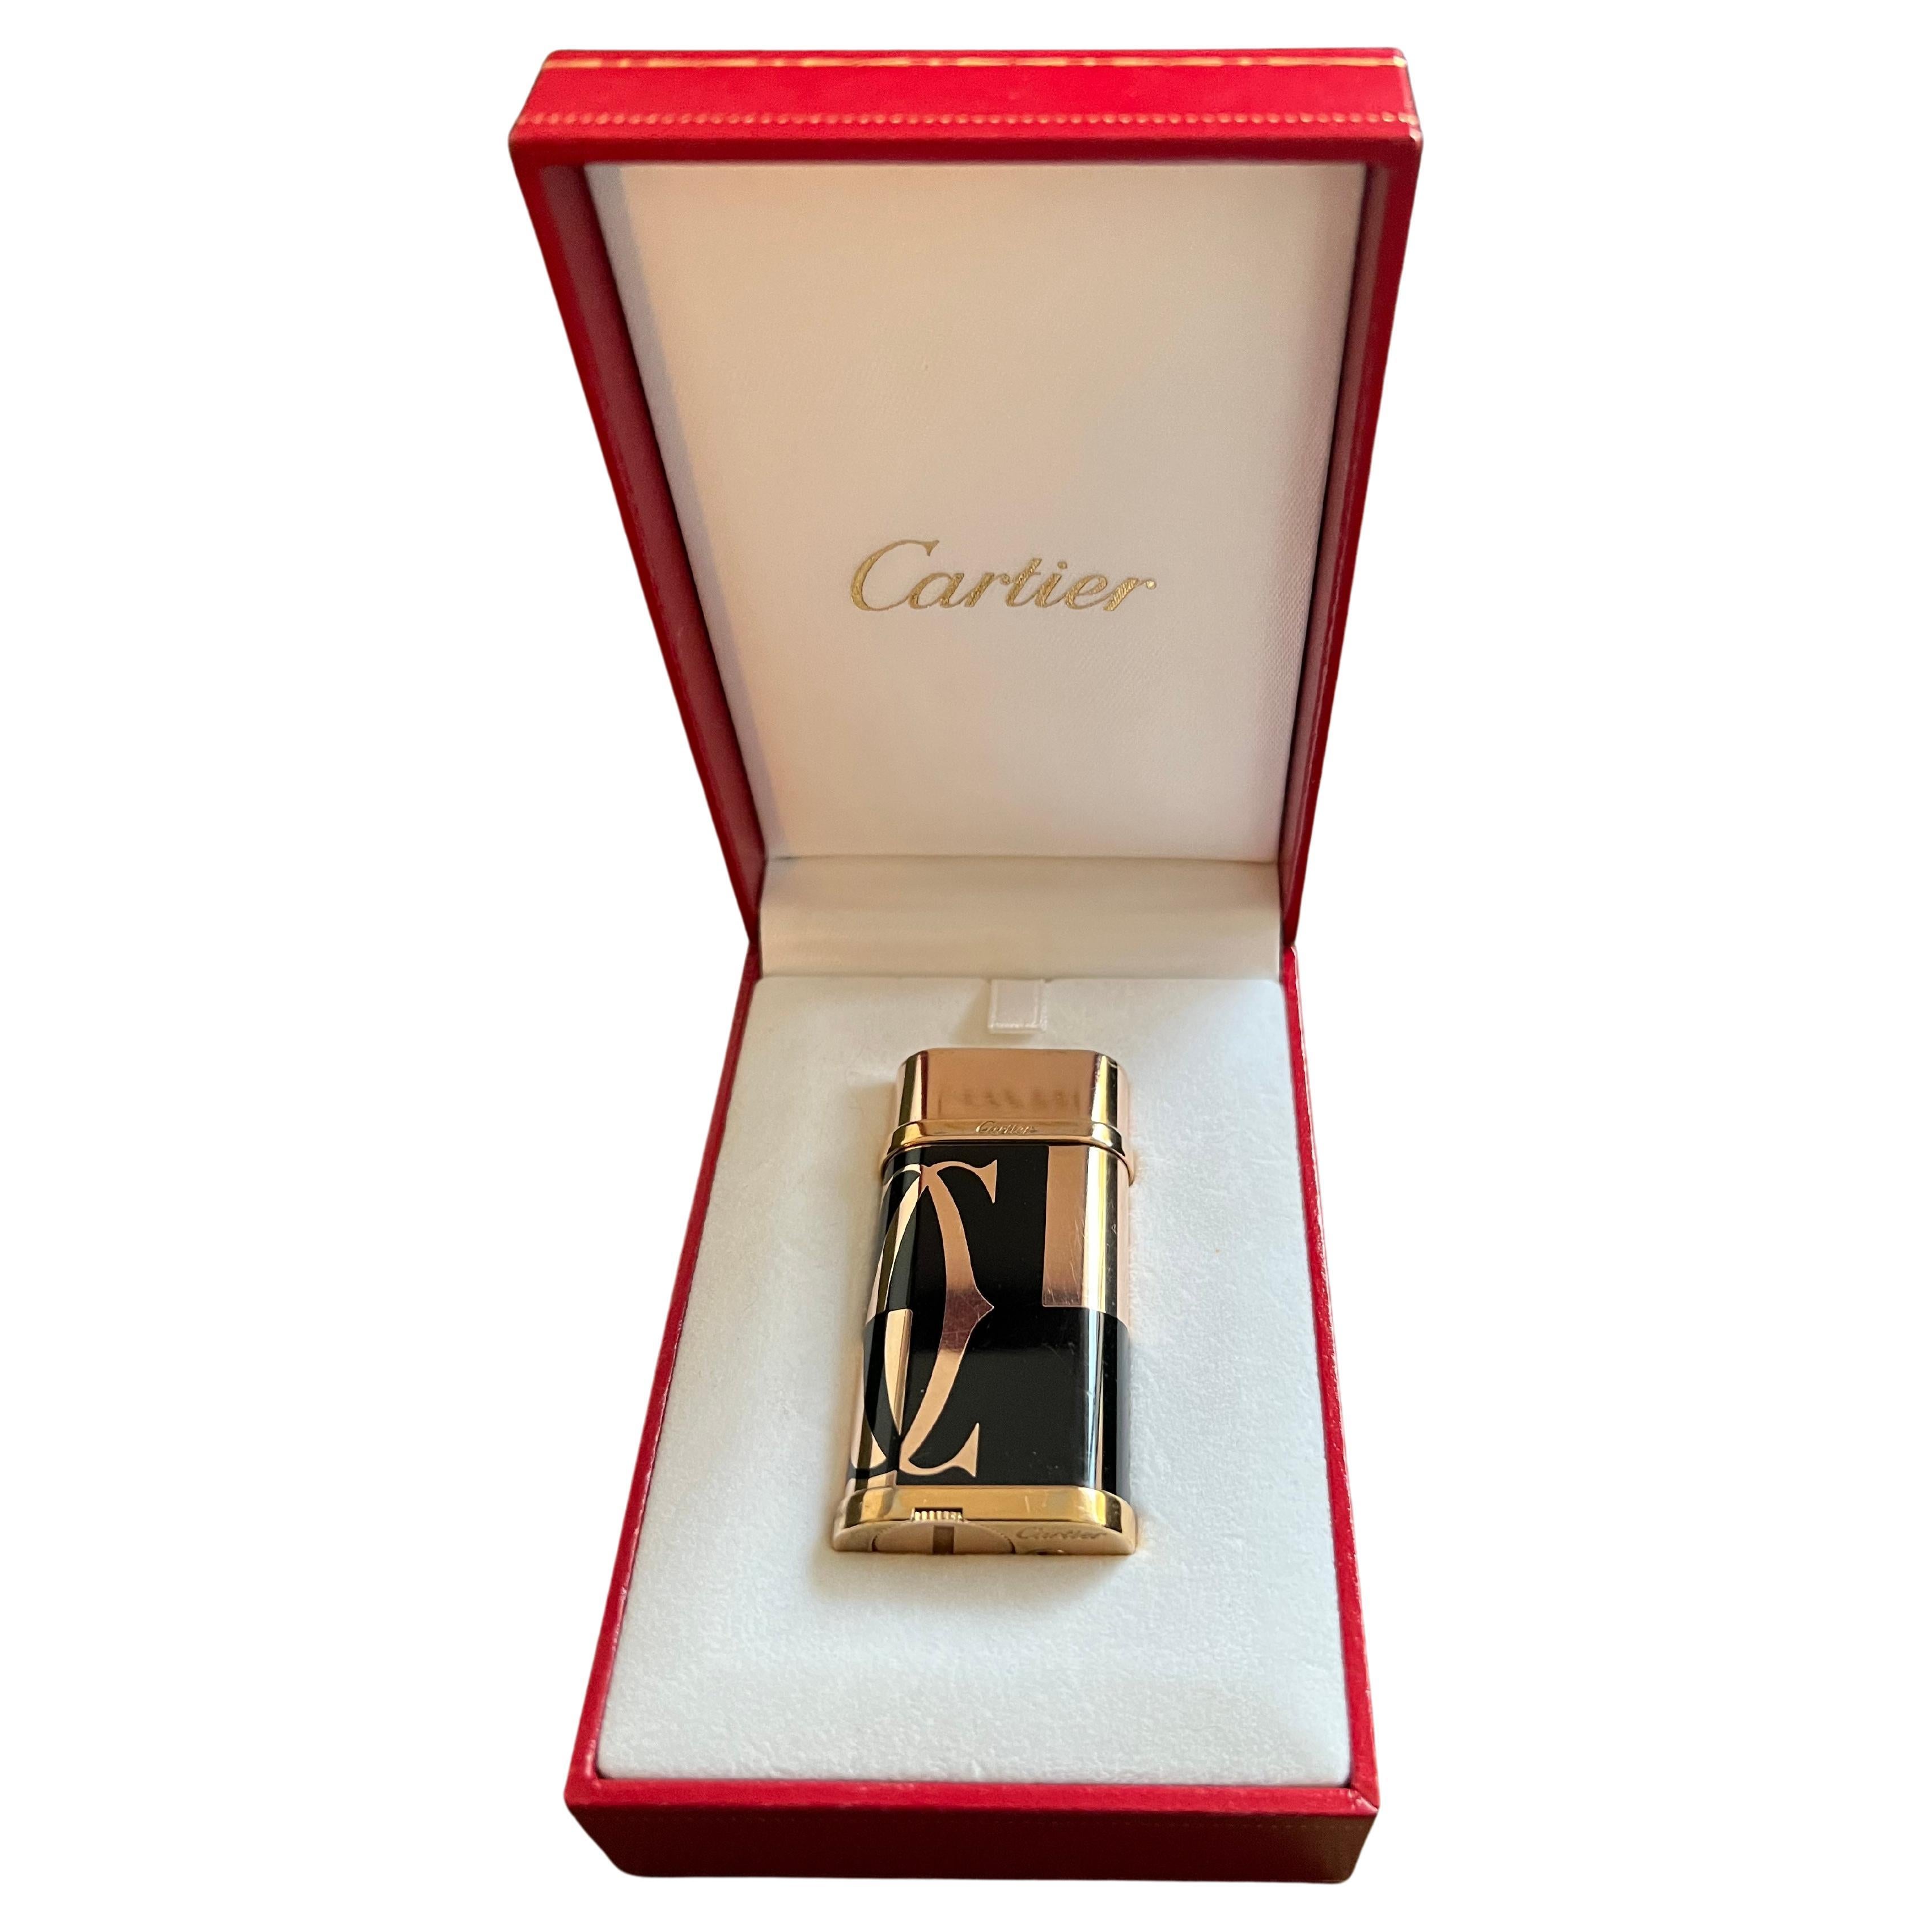 “Le Must the Cartier” Paris Logotype Yellow Gold and Black Lacquer Lighter